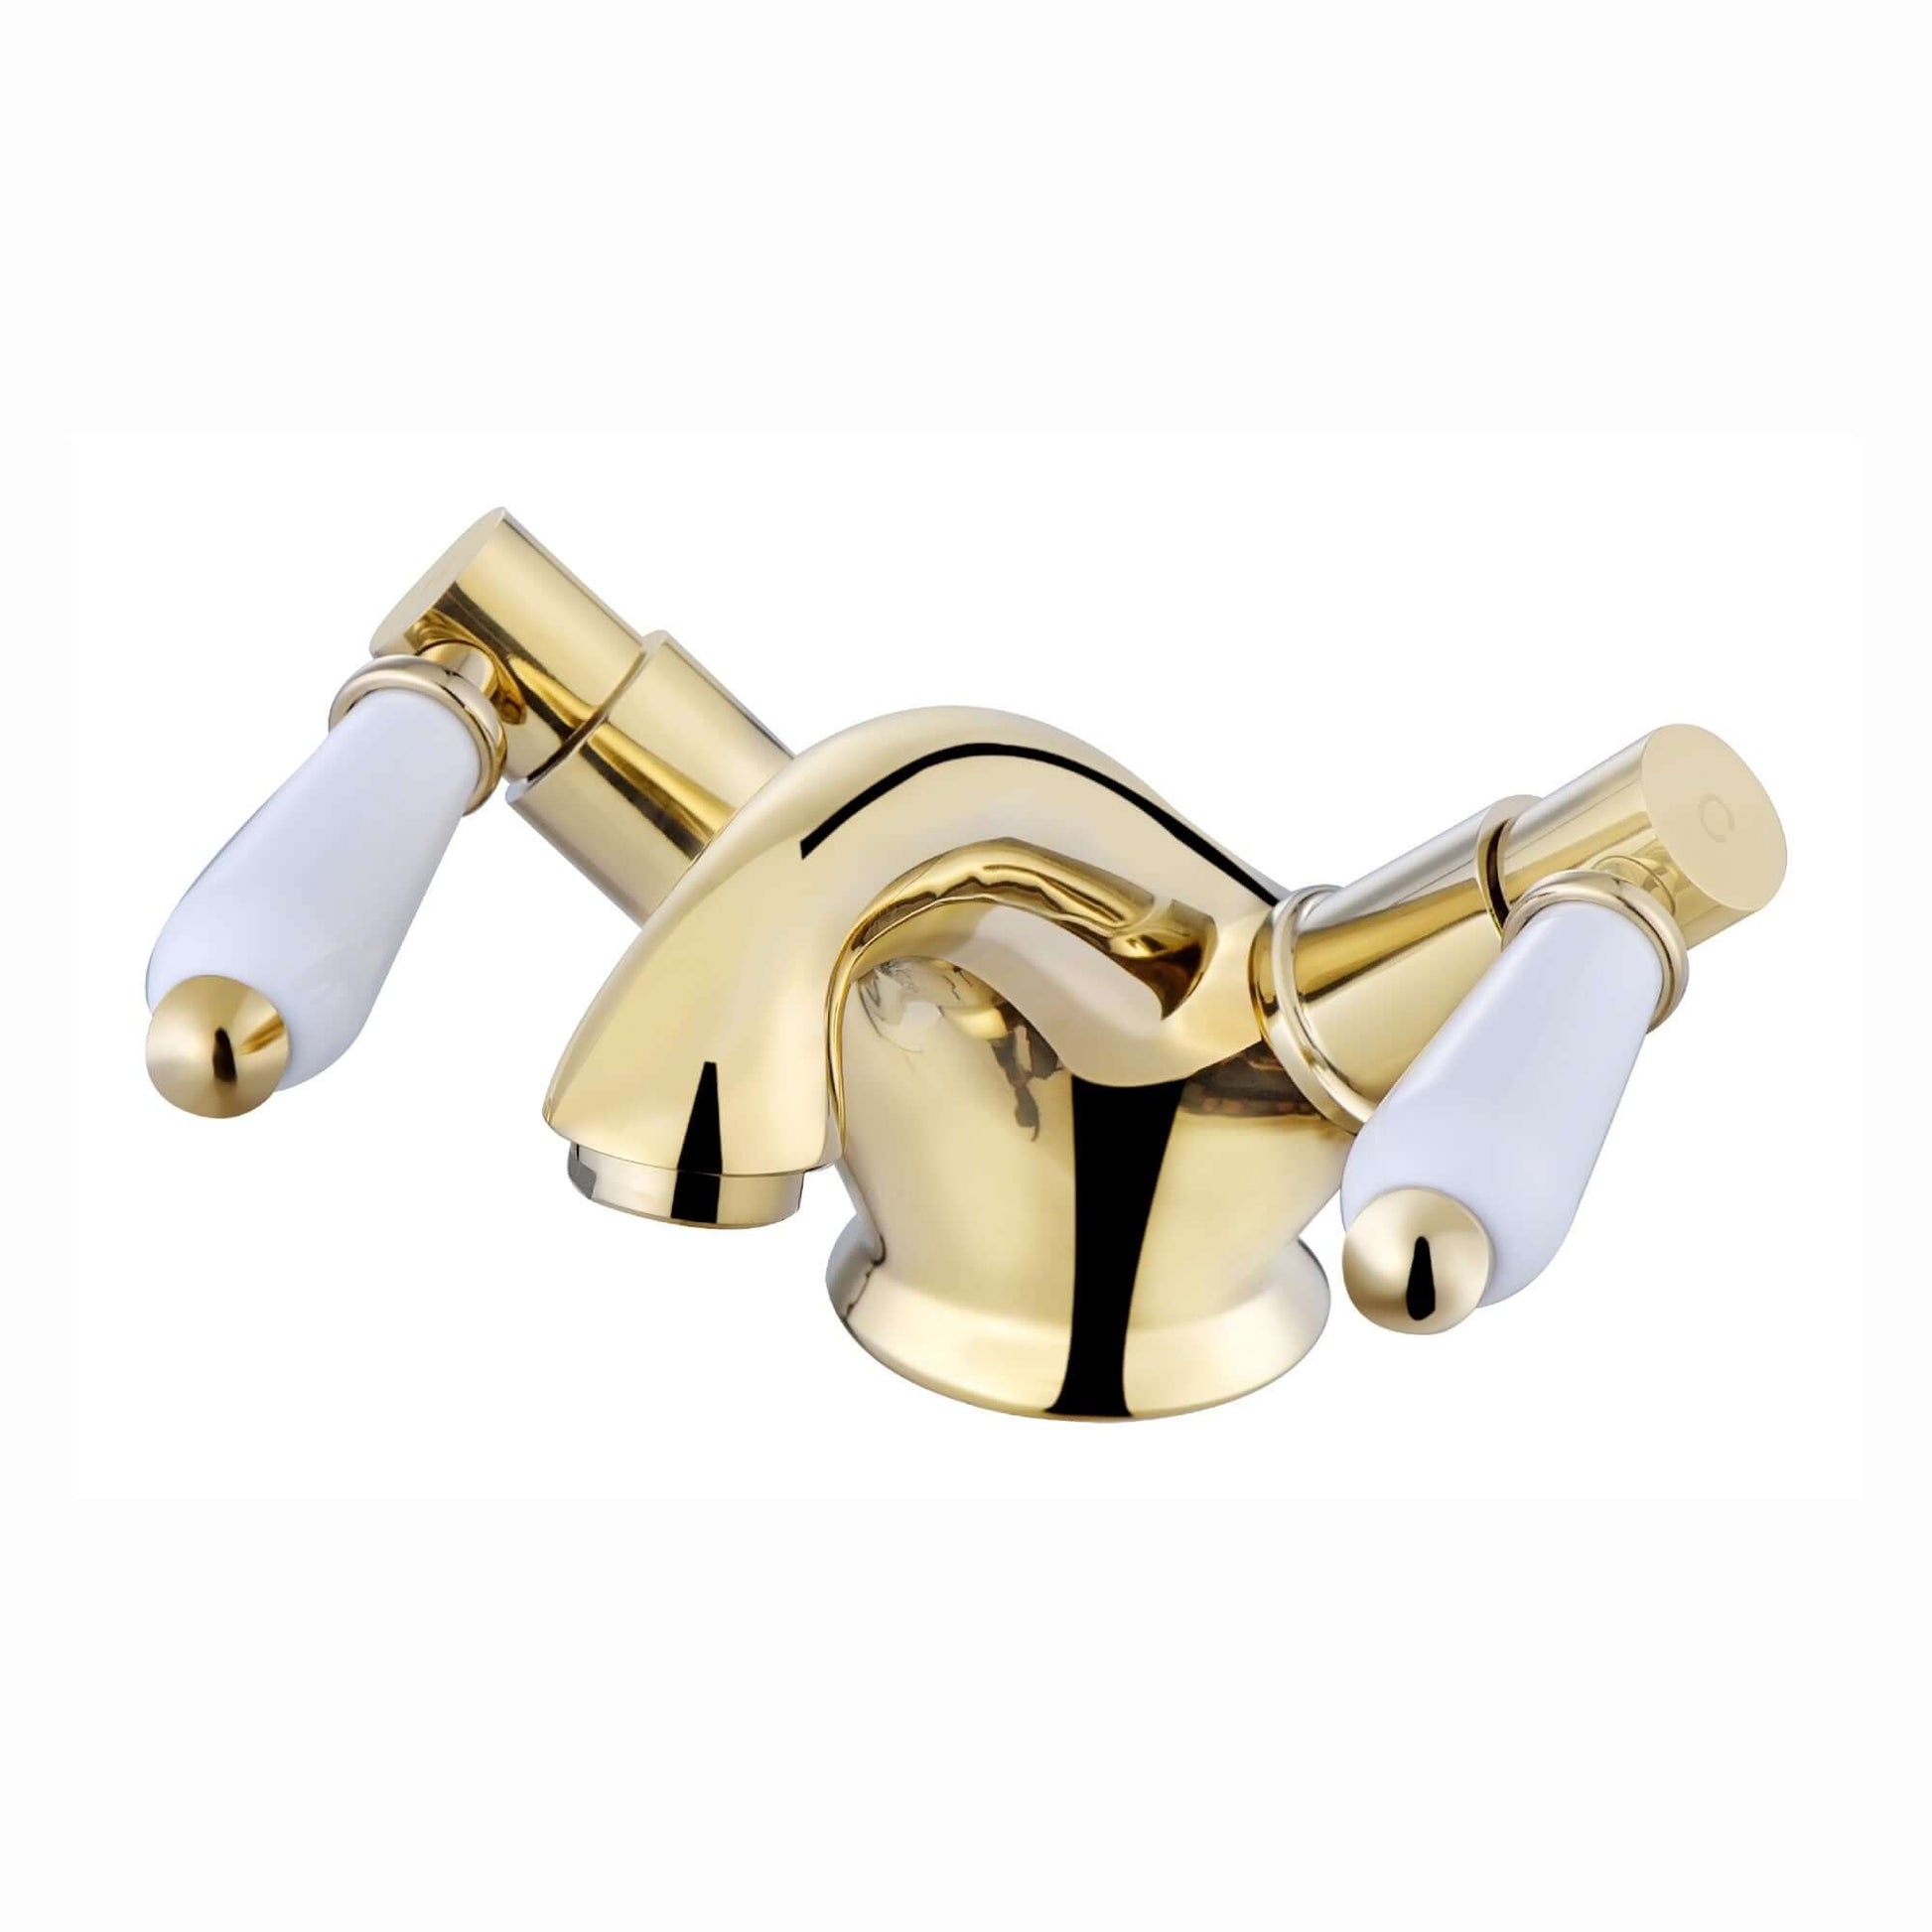 Downton basin mixer tap with white ceramic levers - English gold - Taps